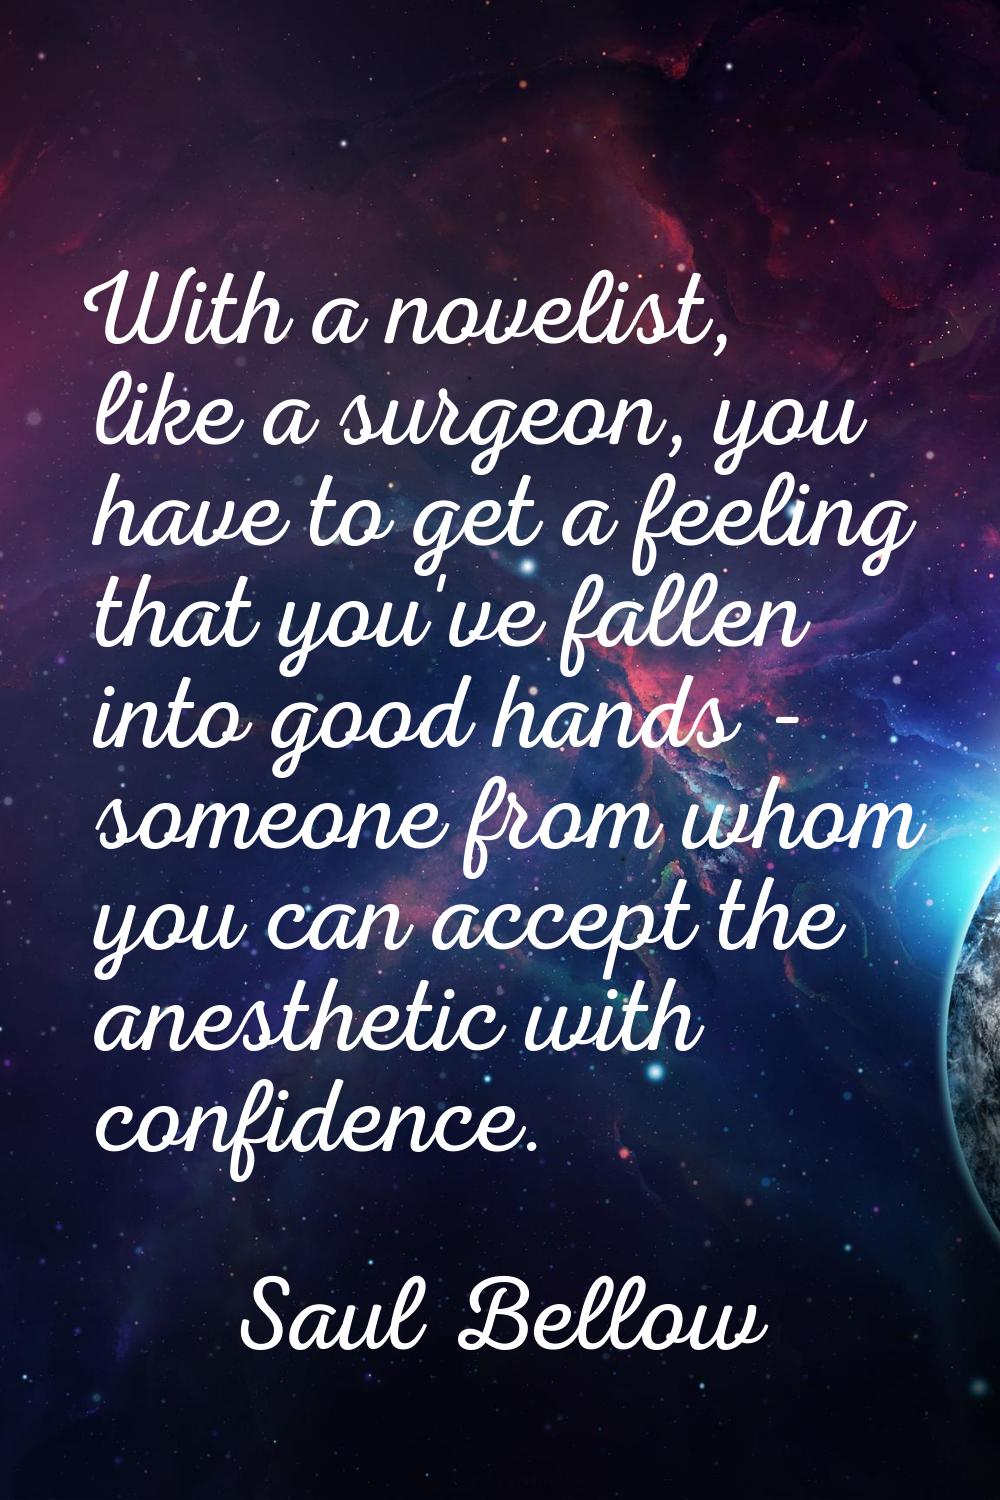 With a novelist, like a surgeon, you have to get a feeling that you've fallen into good hands - som